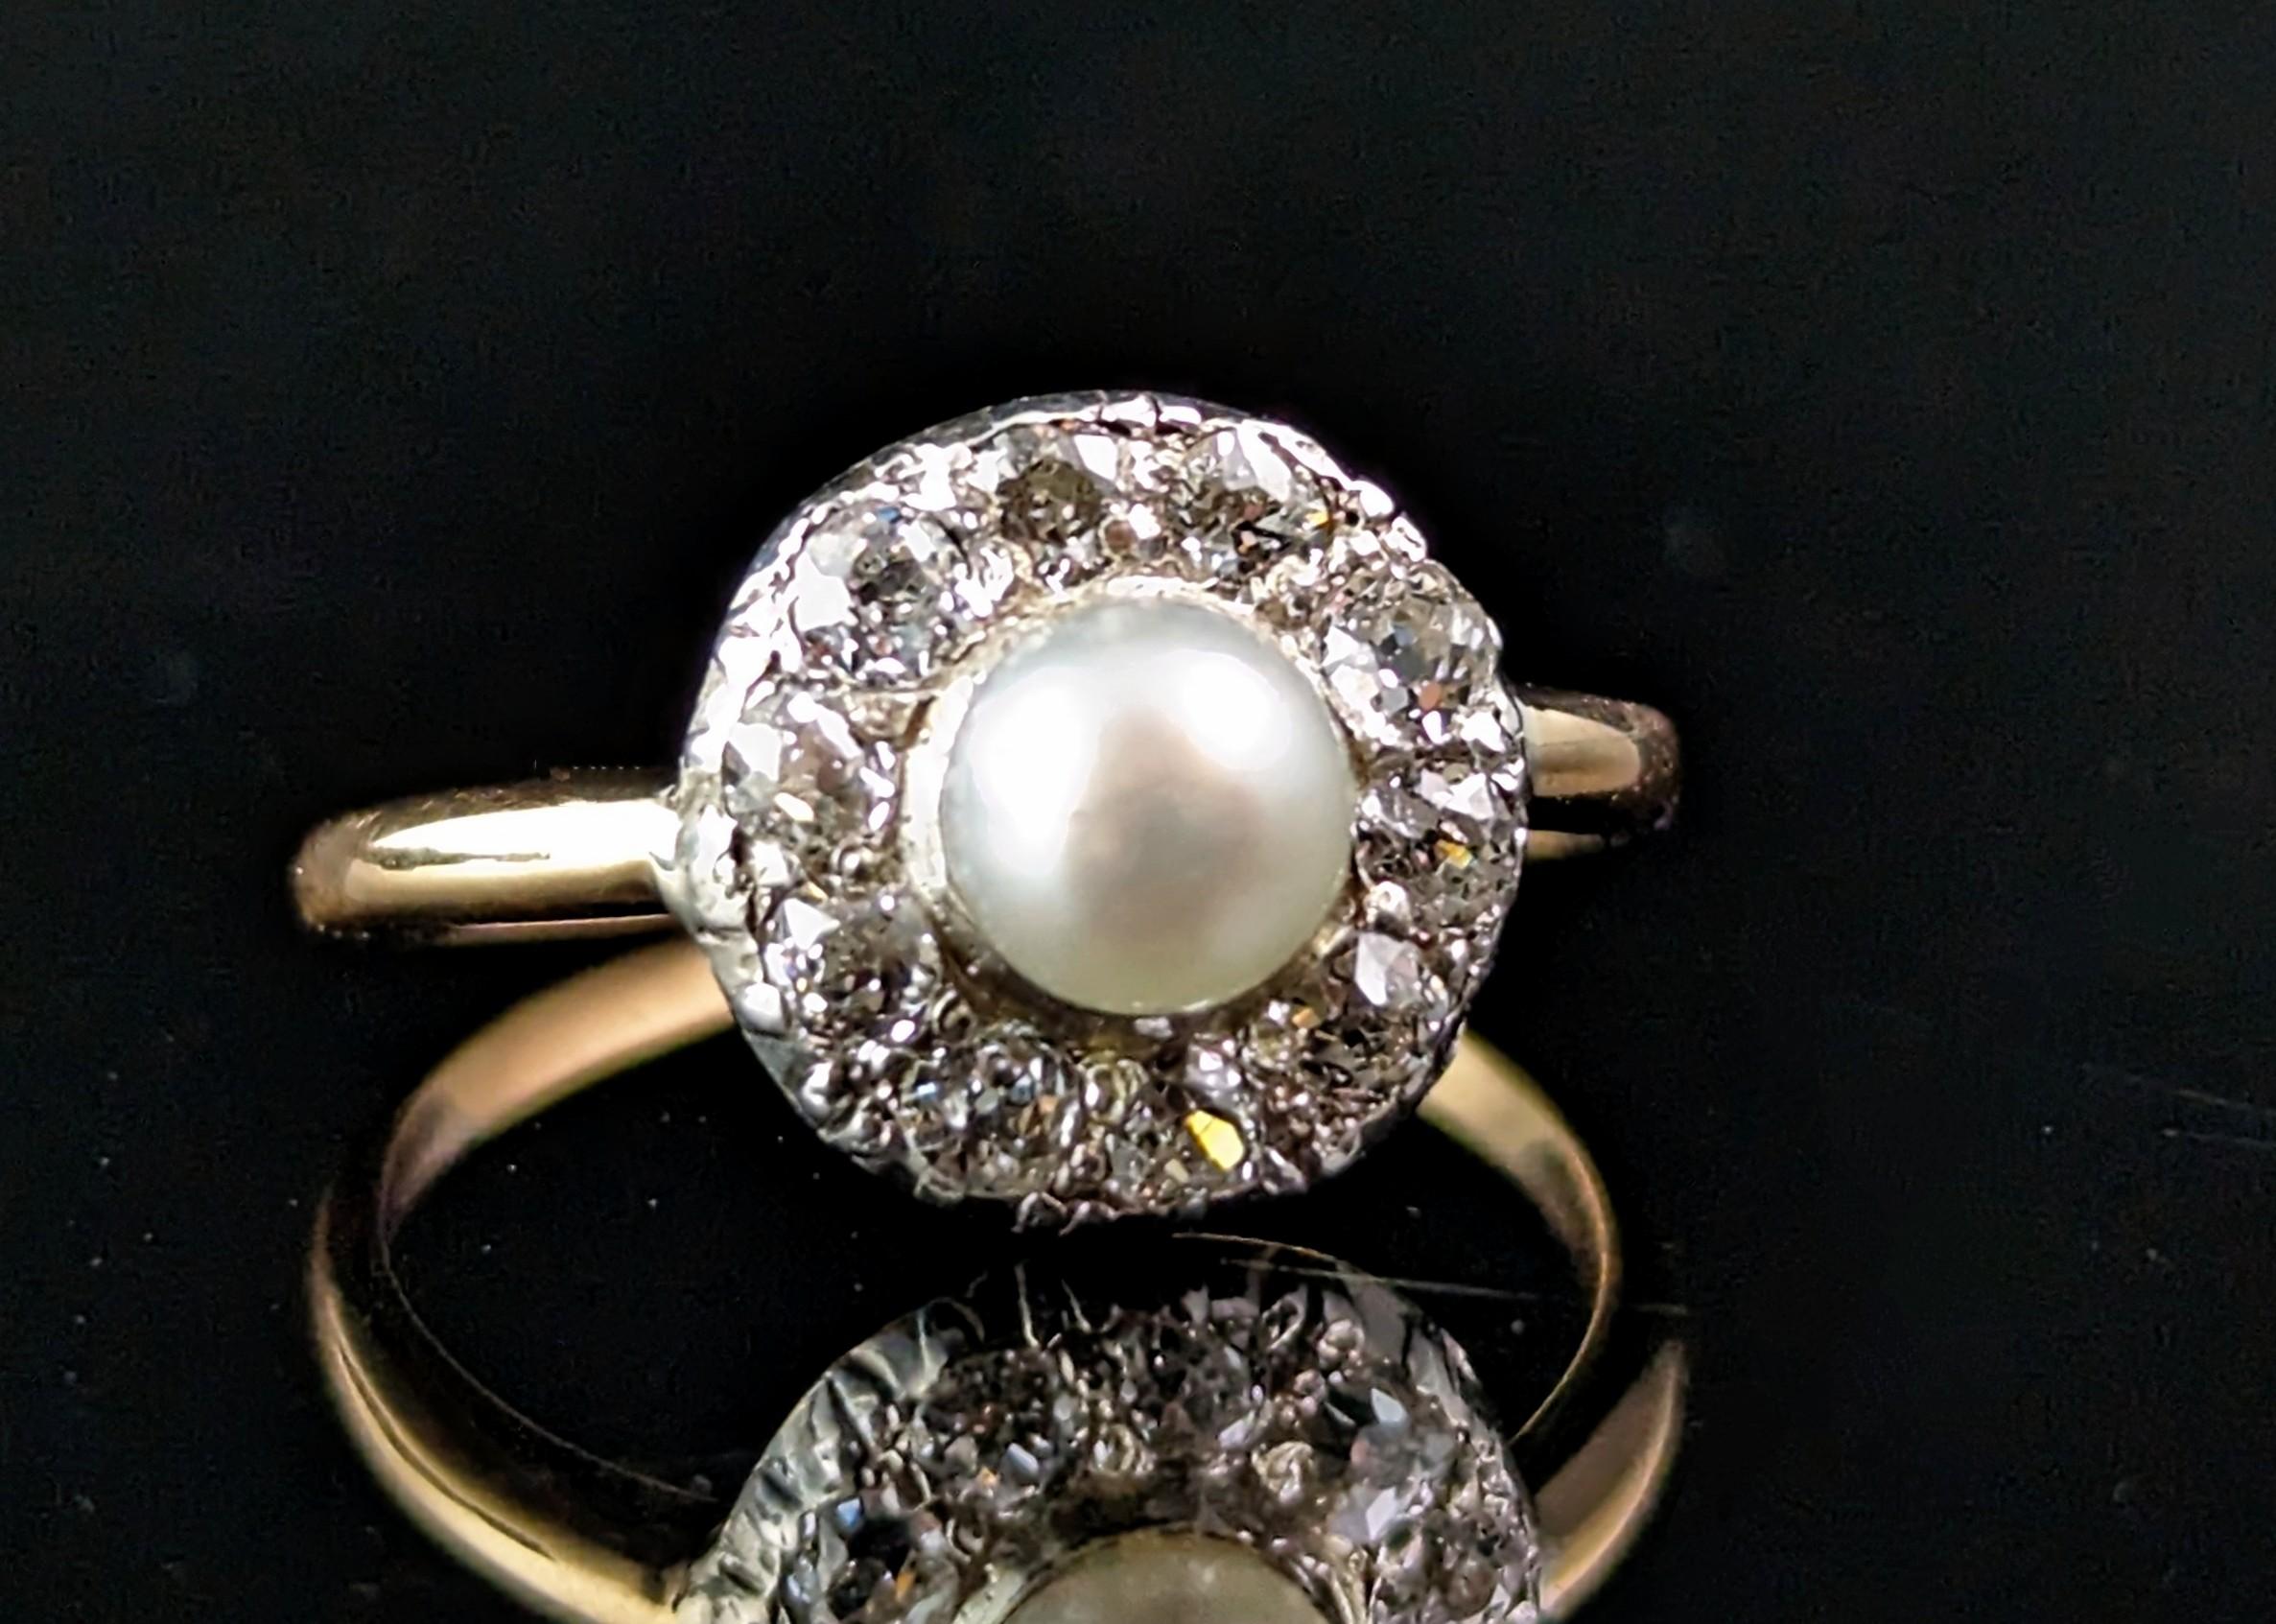 A beautiful antique 18ct gold diamond and pearl cluster ring.

A real showstopper of a ring it features a central lustrous pearl surrounded by a halo of sparkling old cut diamonds.

The pearl glows with a cool bluish hue, a highly desirable tone for